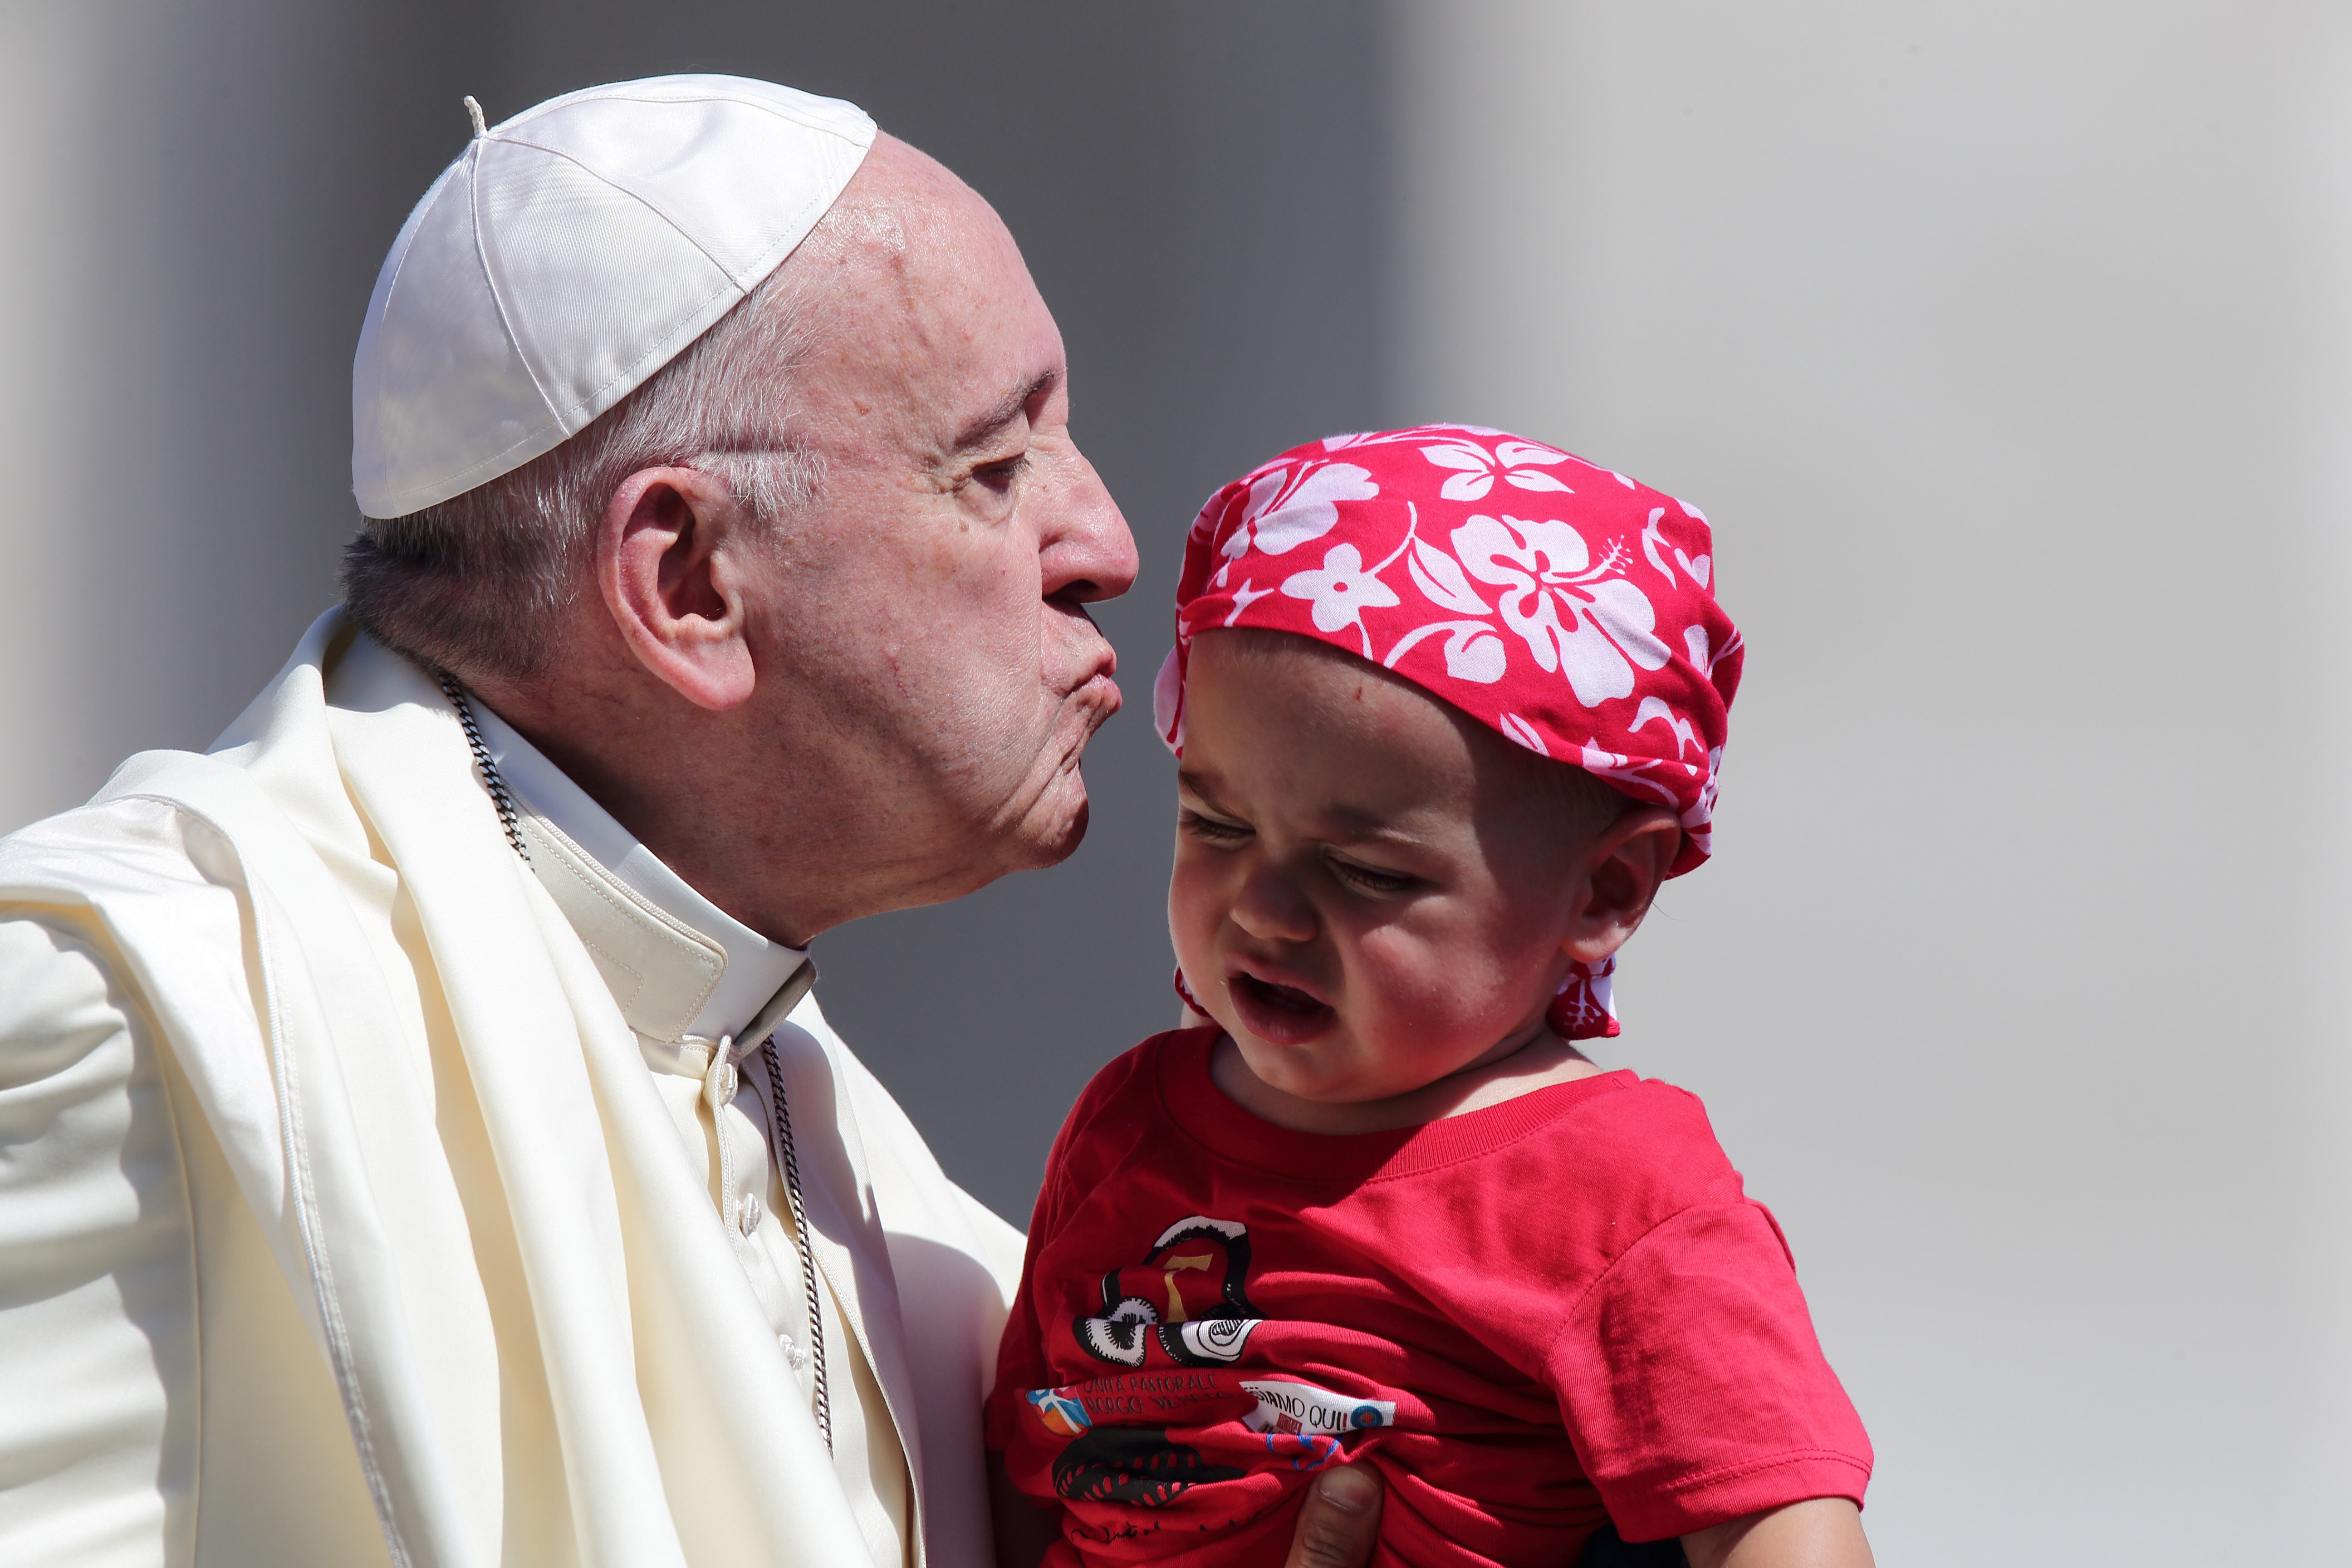 Avoiding evil is not enough, actively pursue goodness, says Pope  